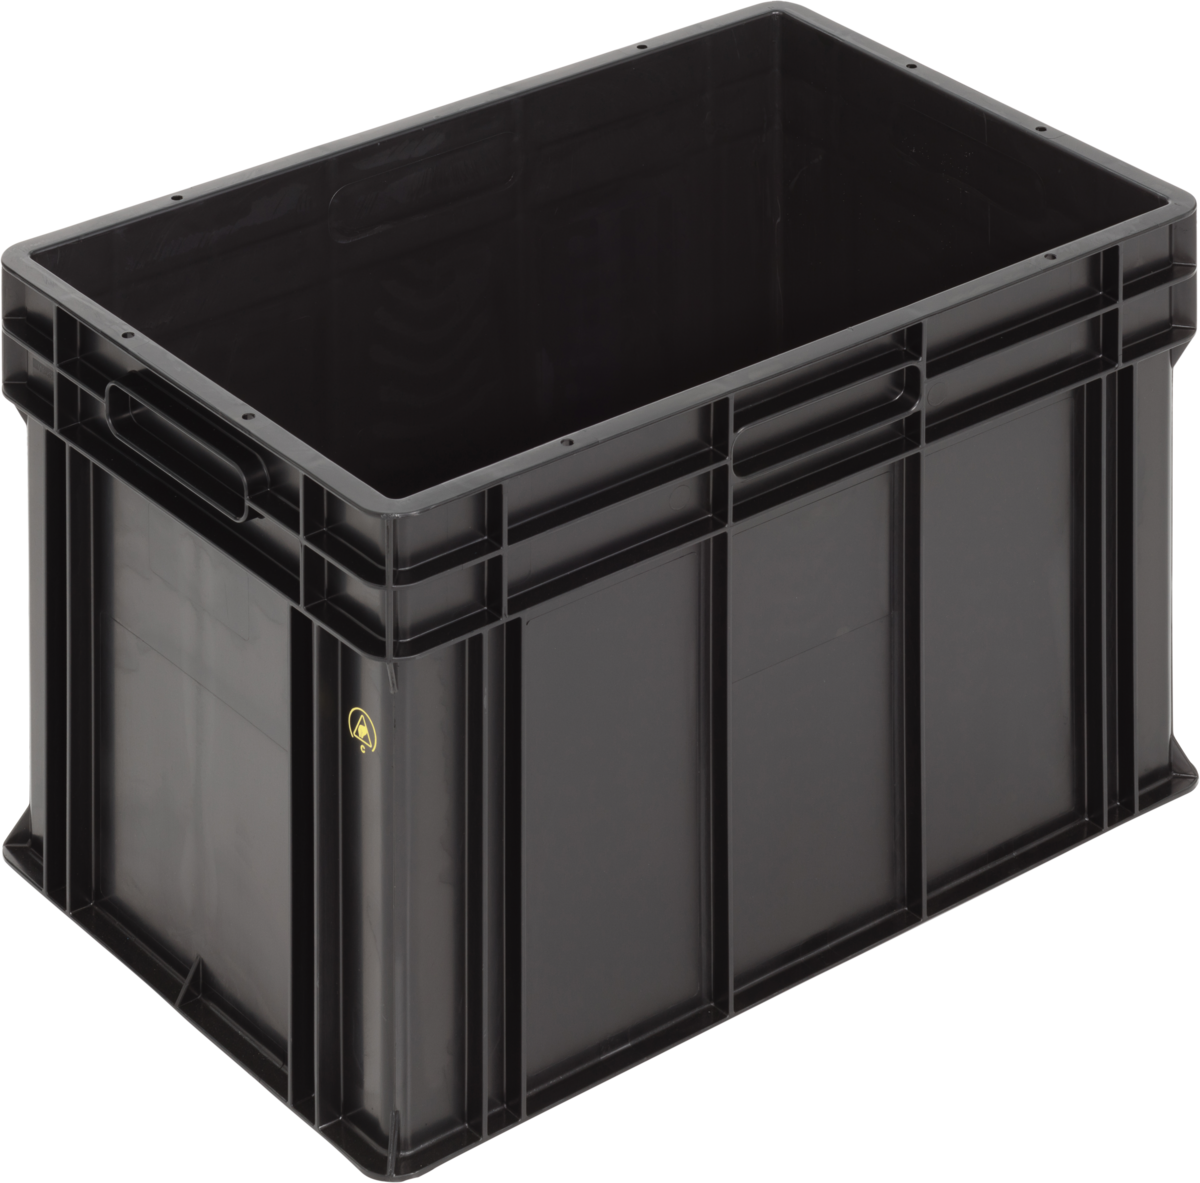 Anti-Static-ESD-Antistatic-ESD-Safe-SGL-Norm-Stacking-Bin-Containers-Flat-Base-Ref.-6440.007.992_1004529_600x400x412_01